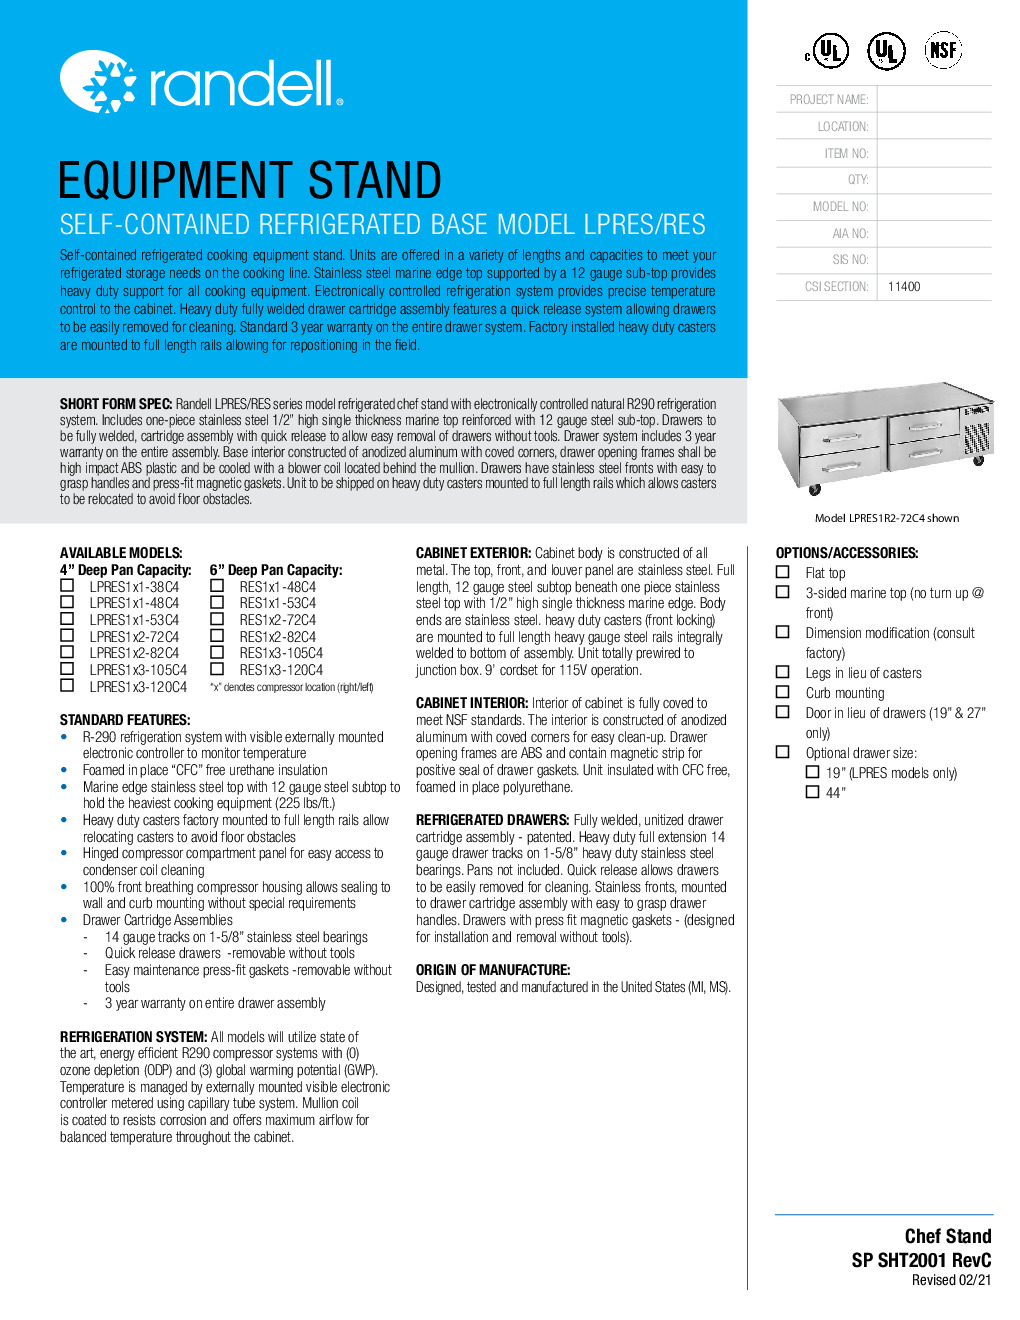 Randell LPRES1R1-48C4 Refrigerated Base Equipment Stand